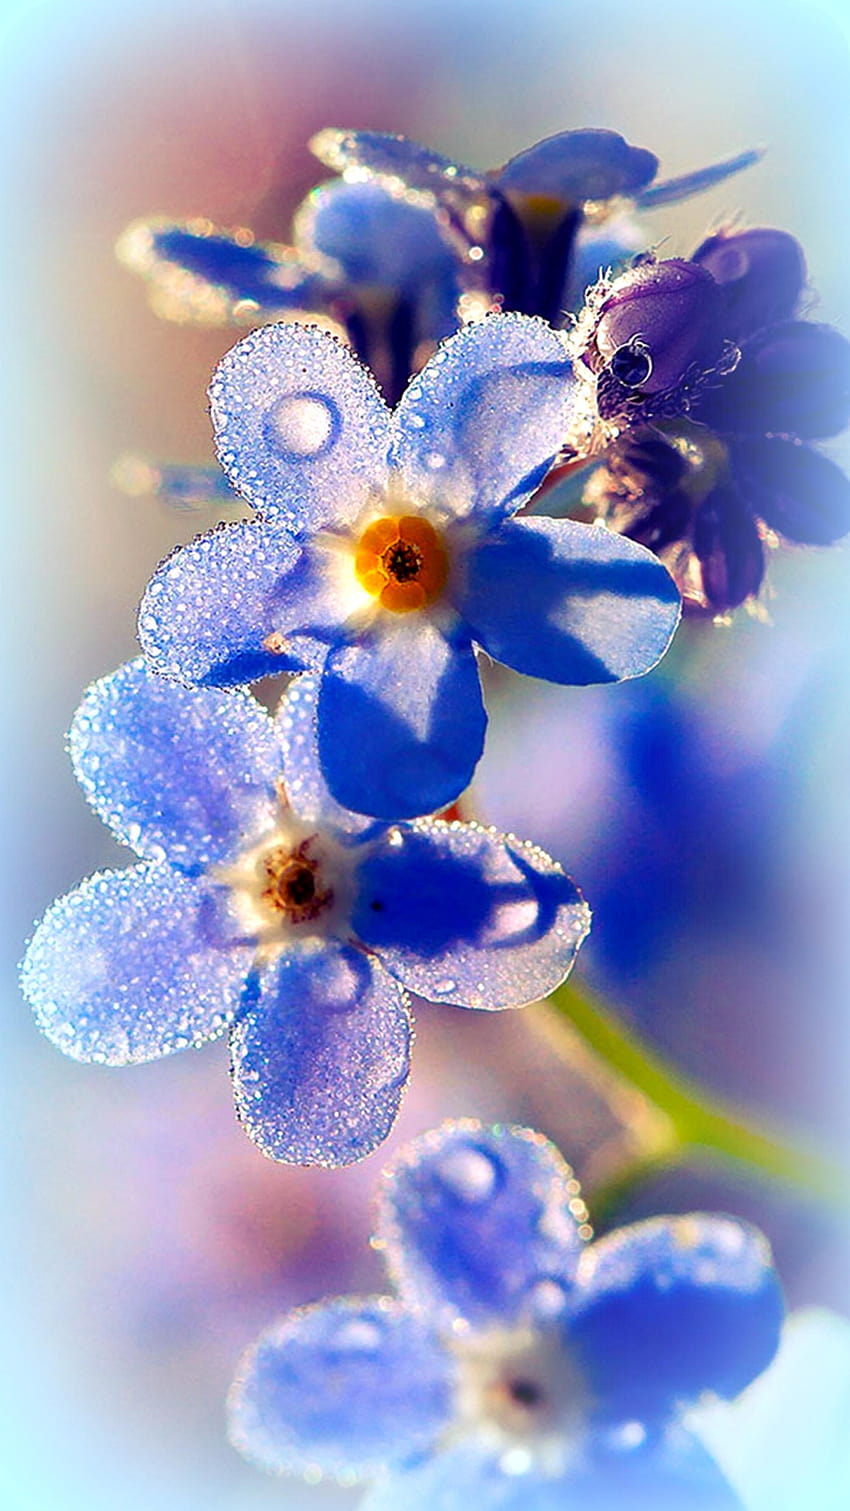 Forget Me Not Flowers HD phone wallpaper